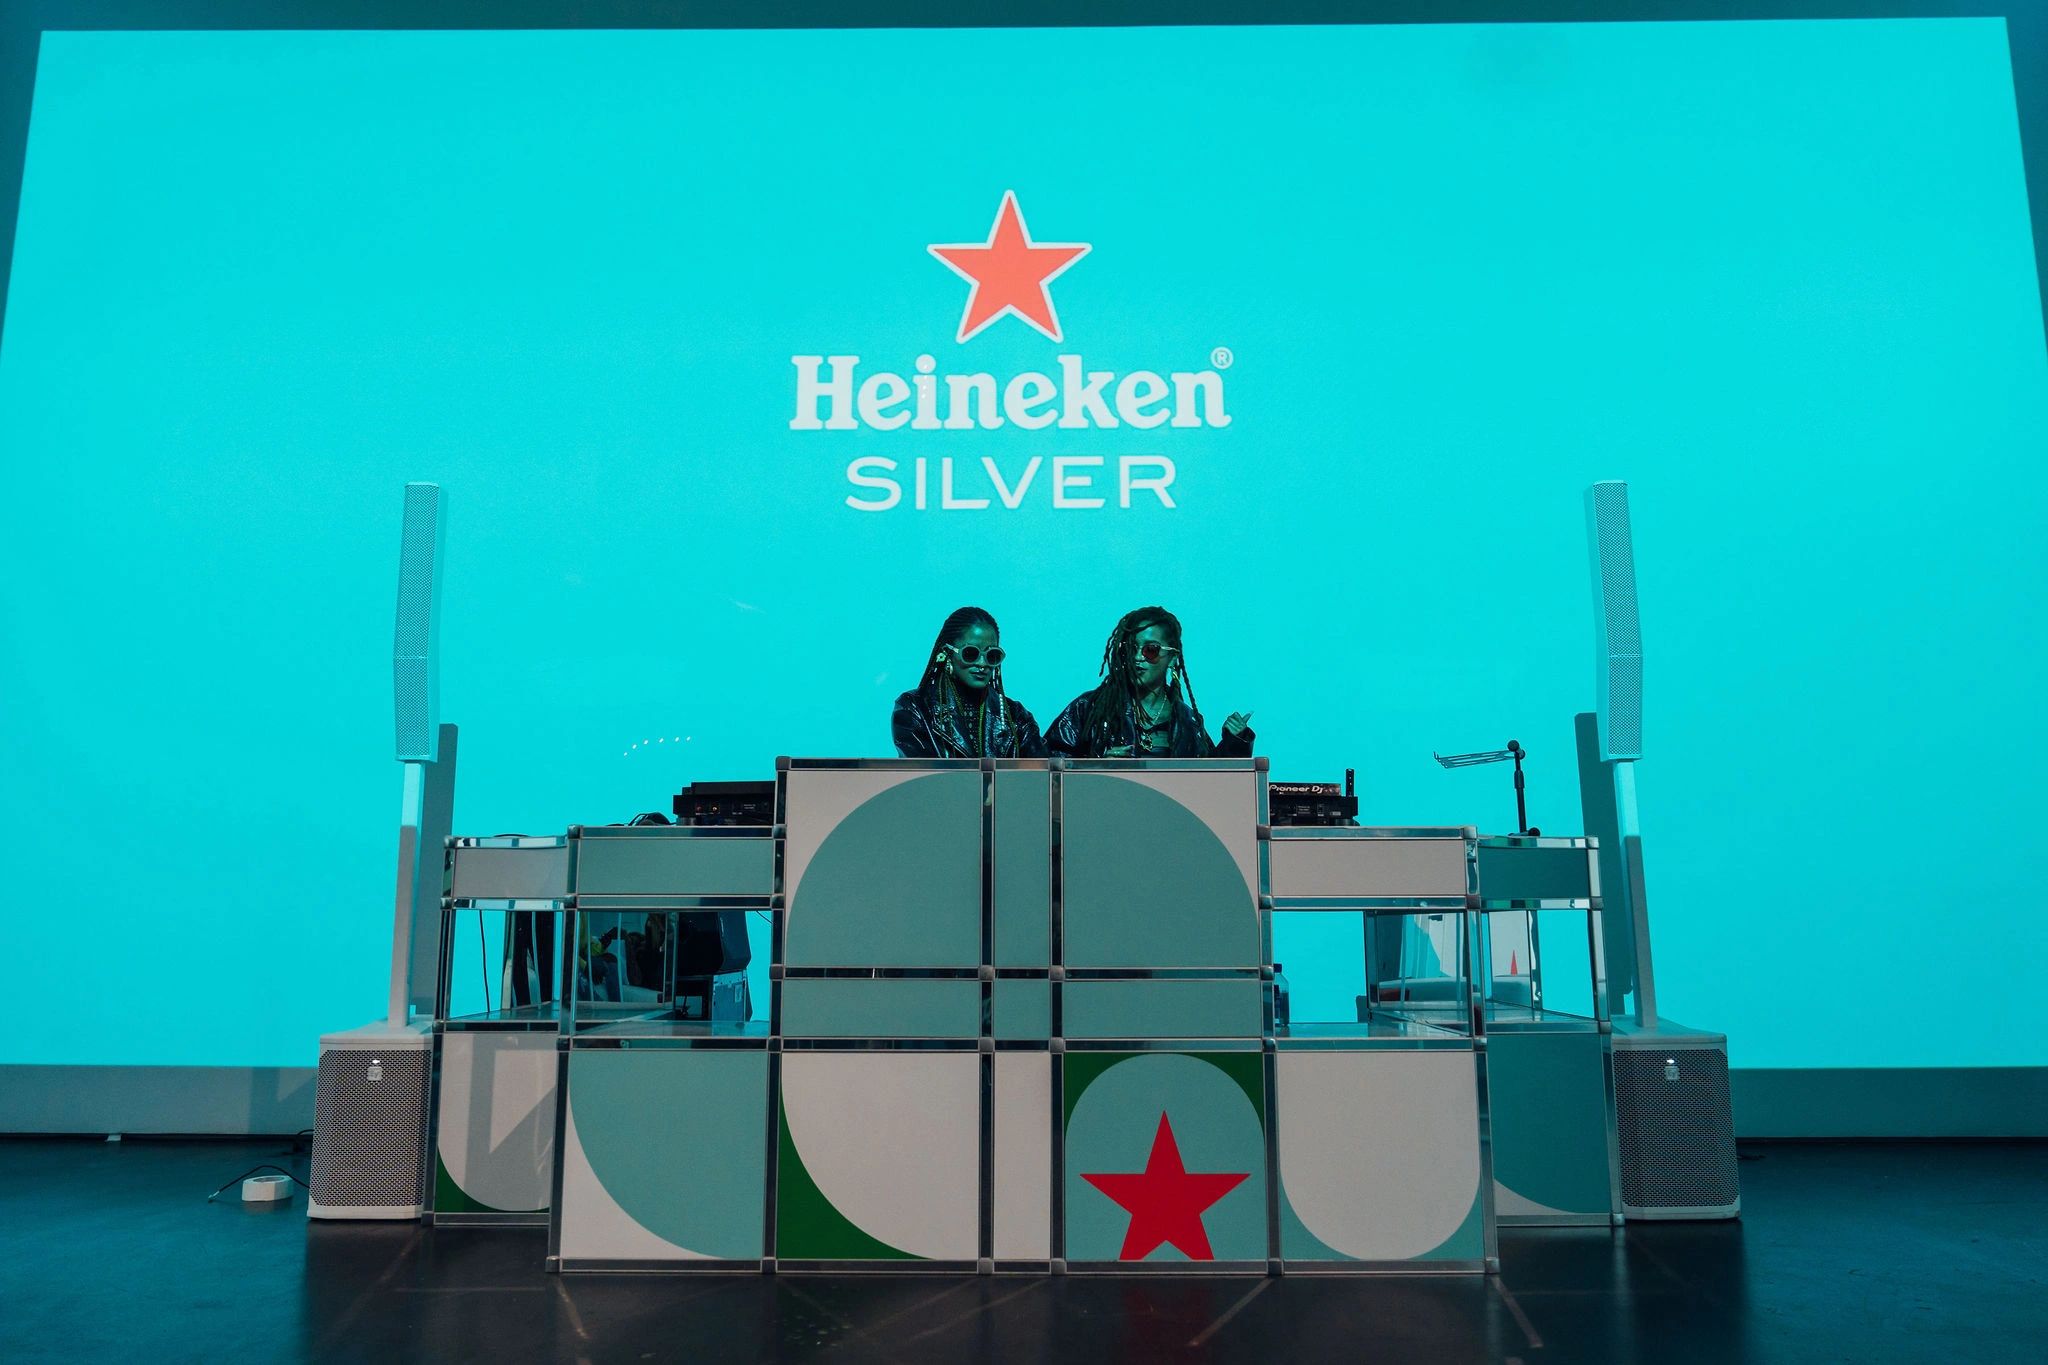 A New Star is Born with the Launch of Heineken Silver